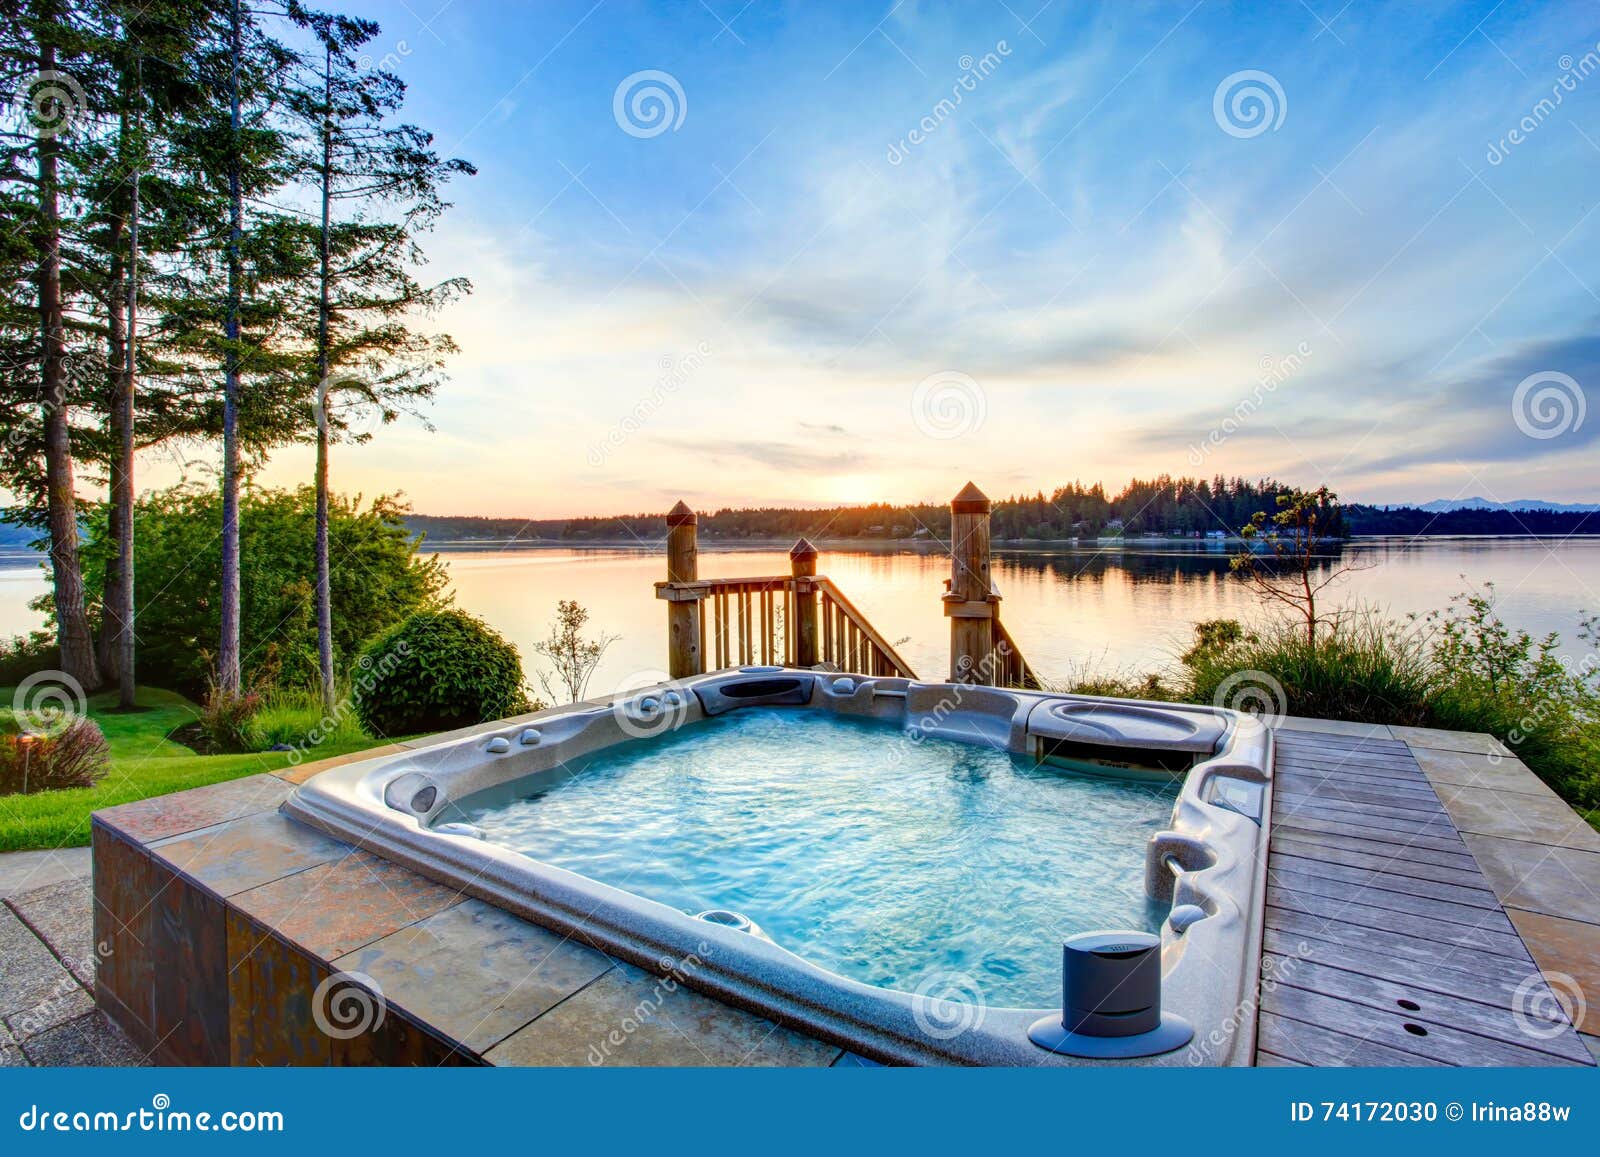 awesome water view with hot tub in summer evening.